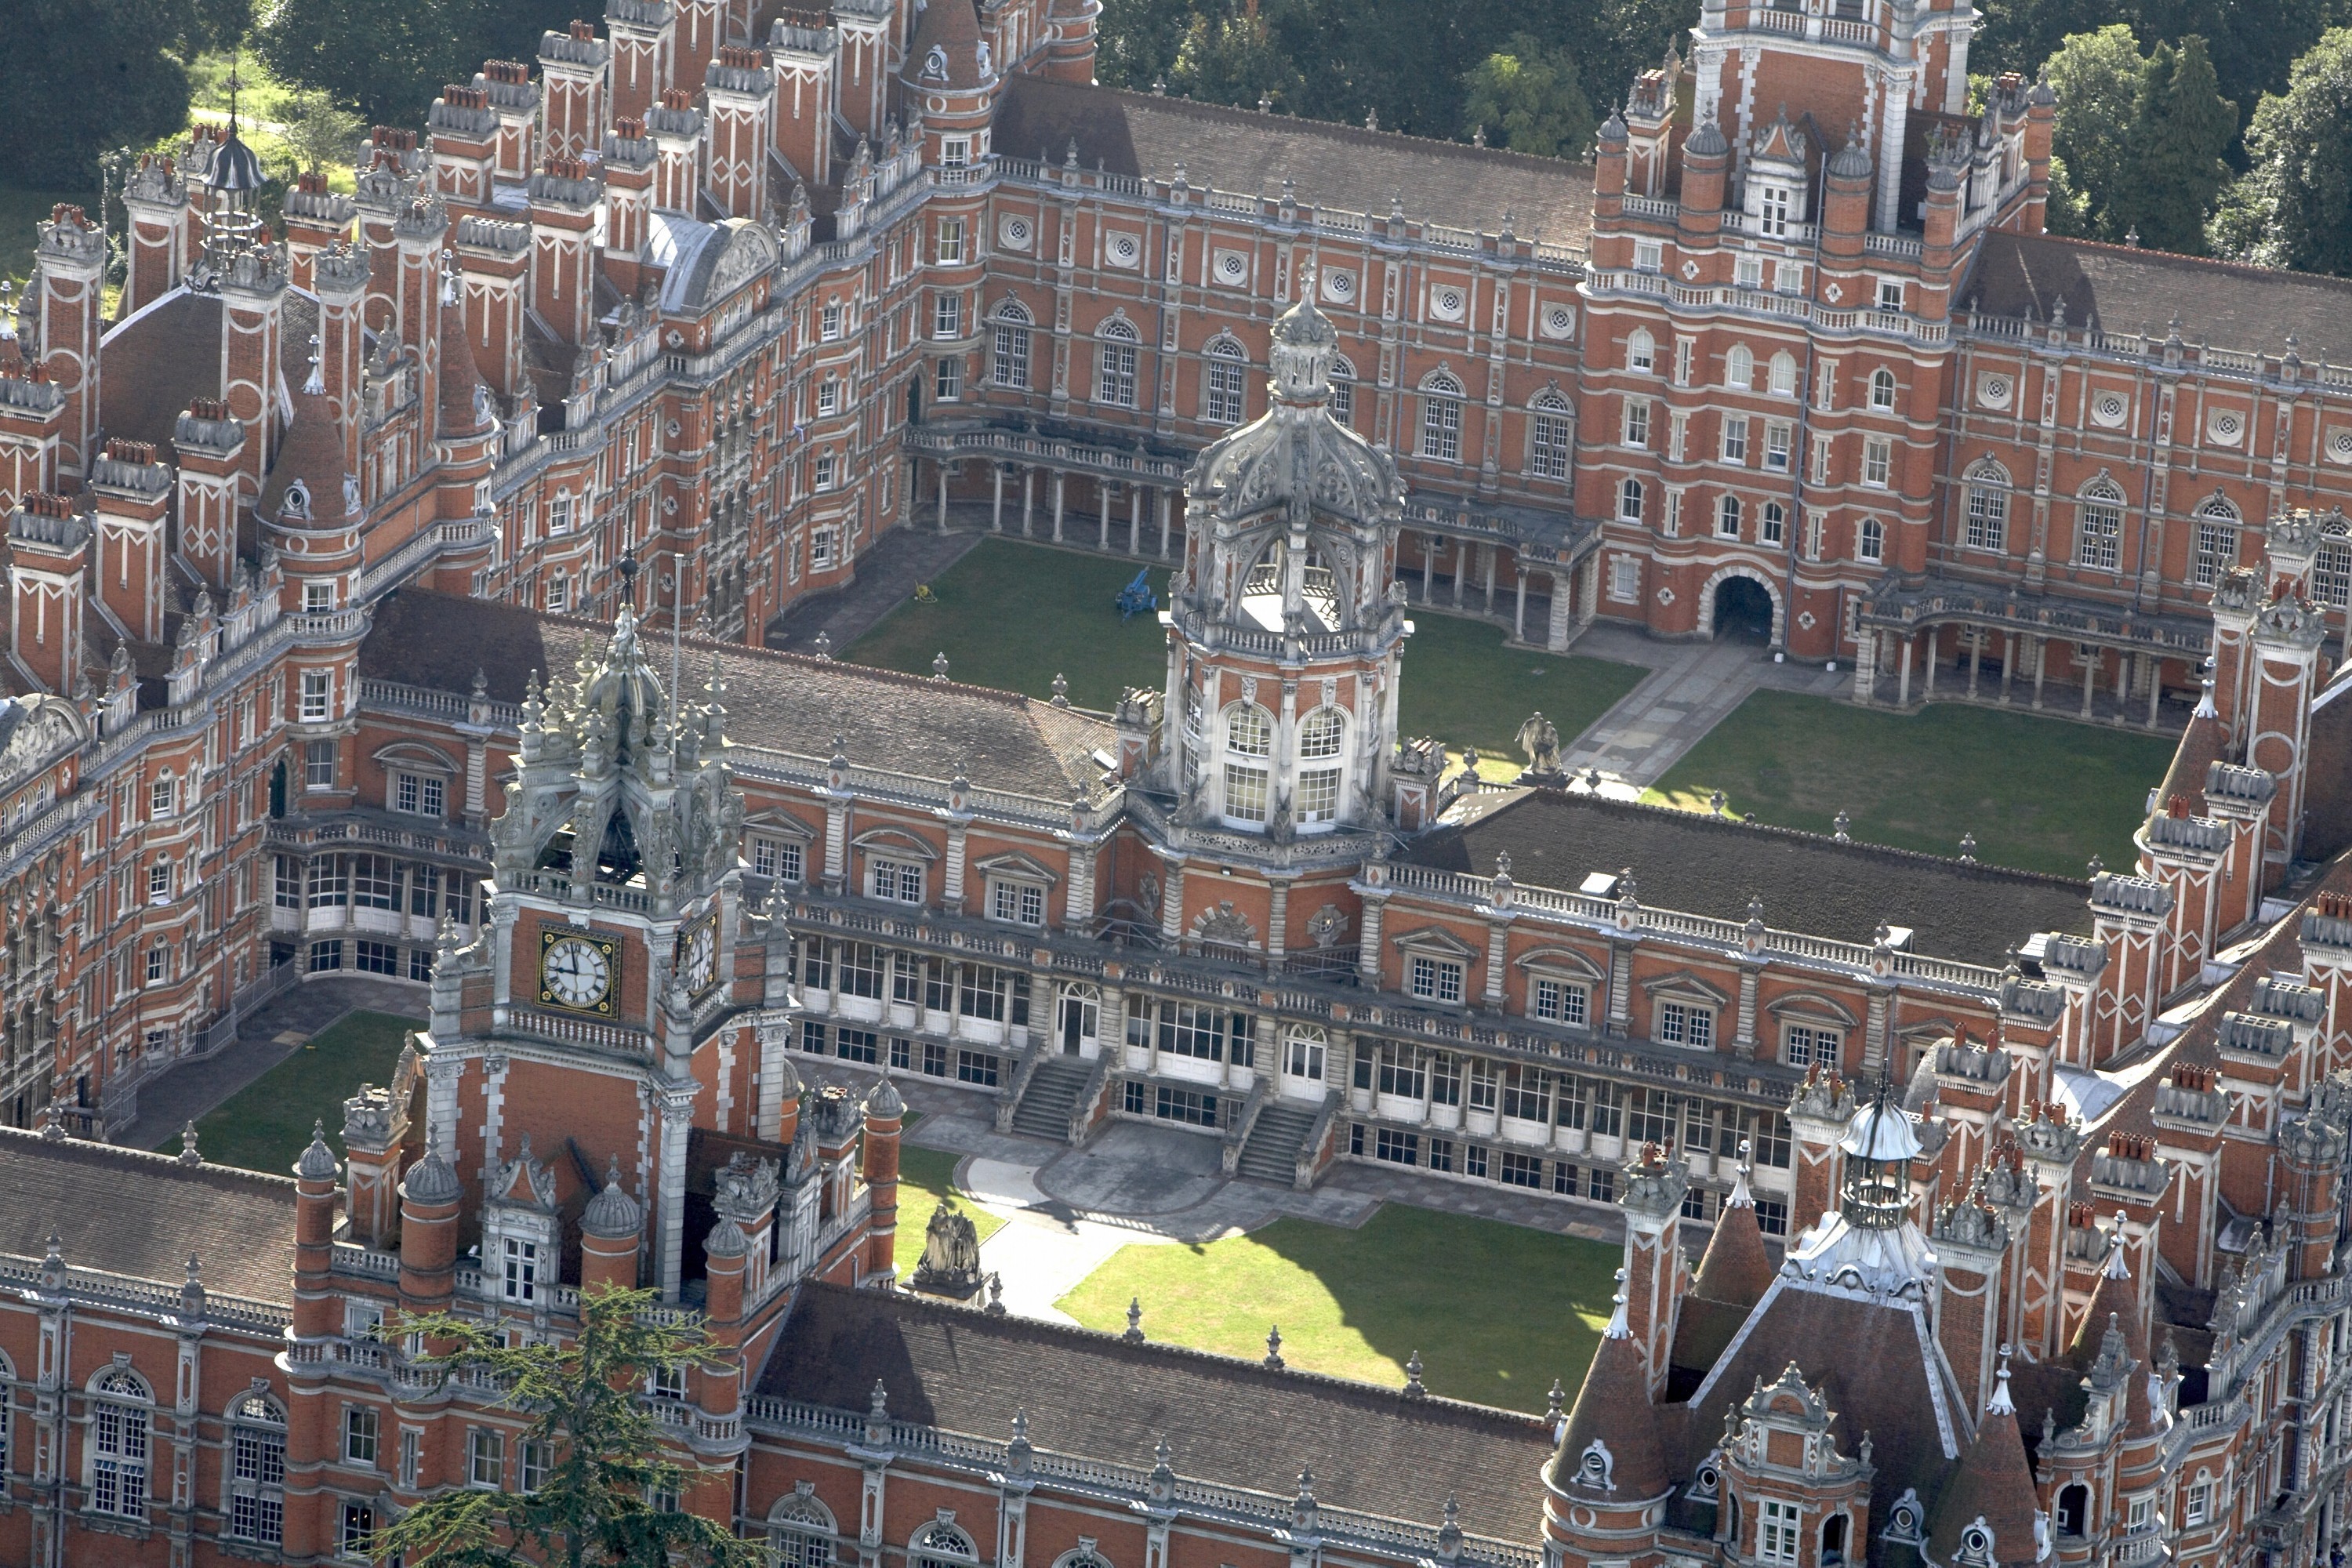 Regulations you need to know - Royal Holloway 158